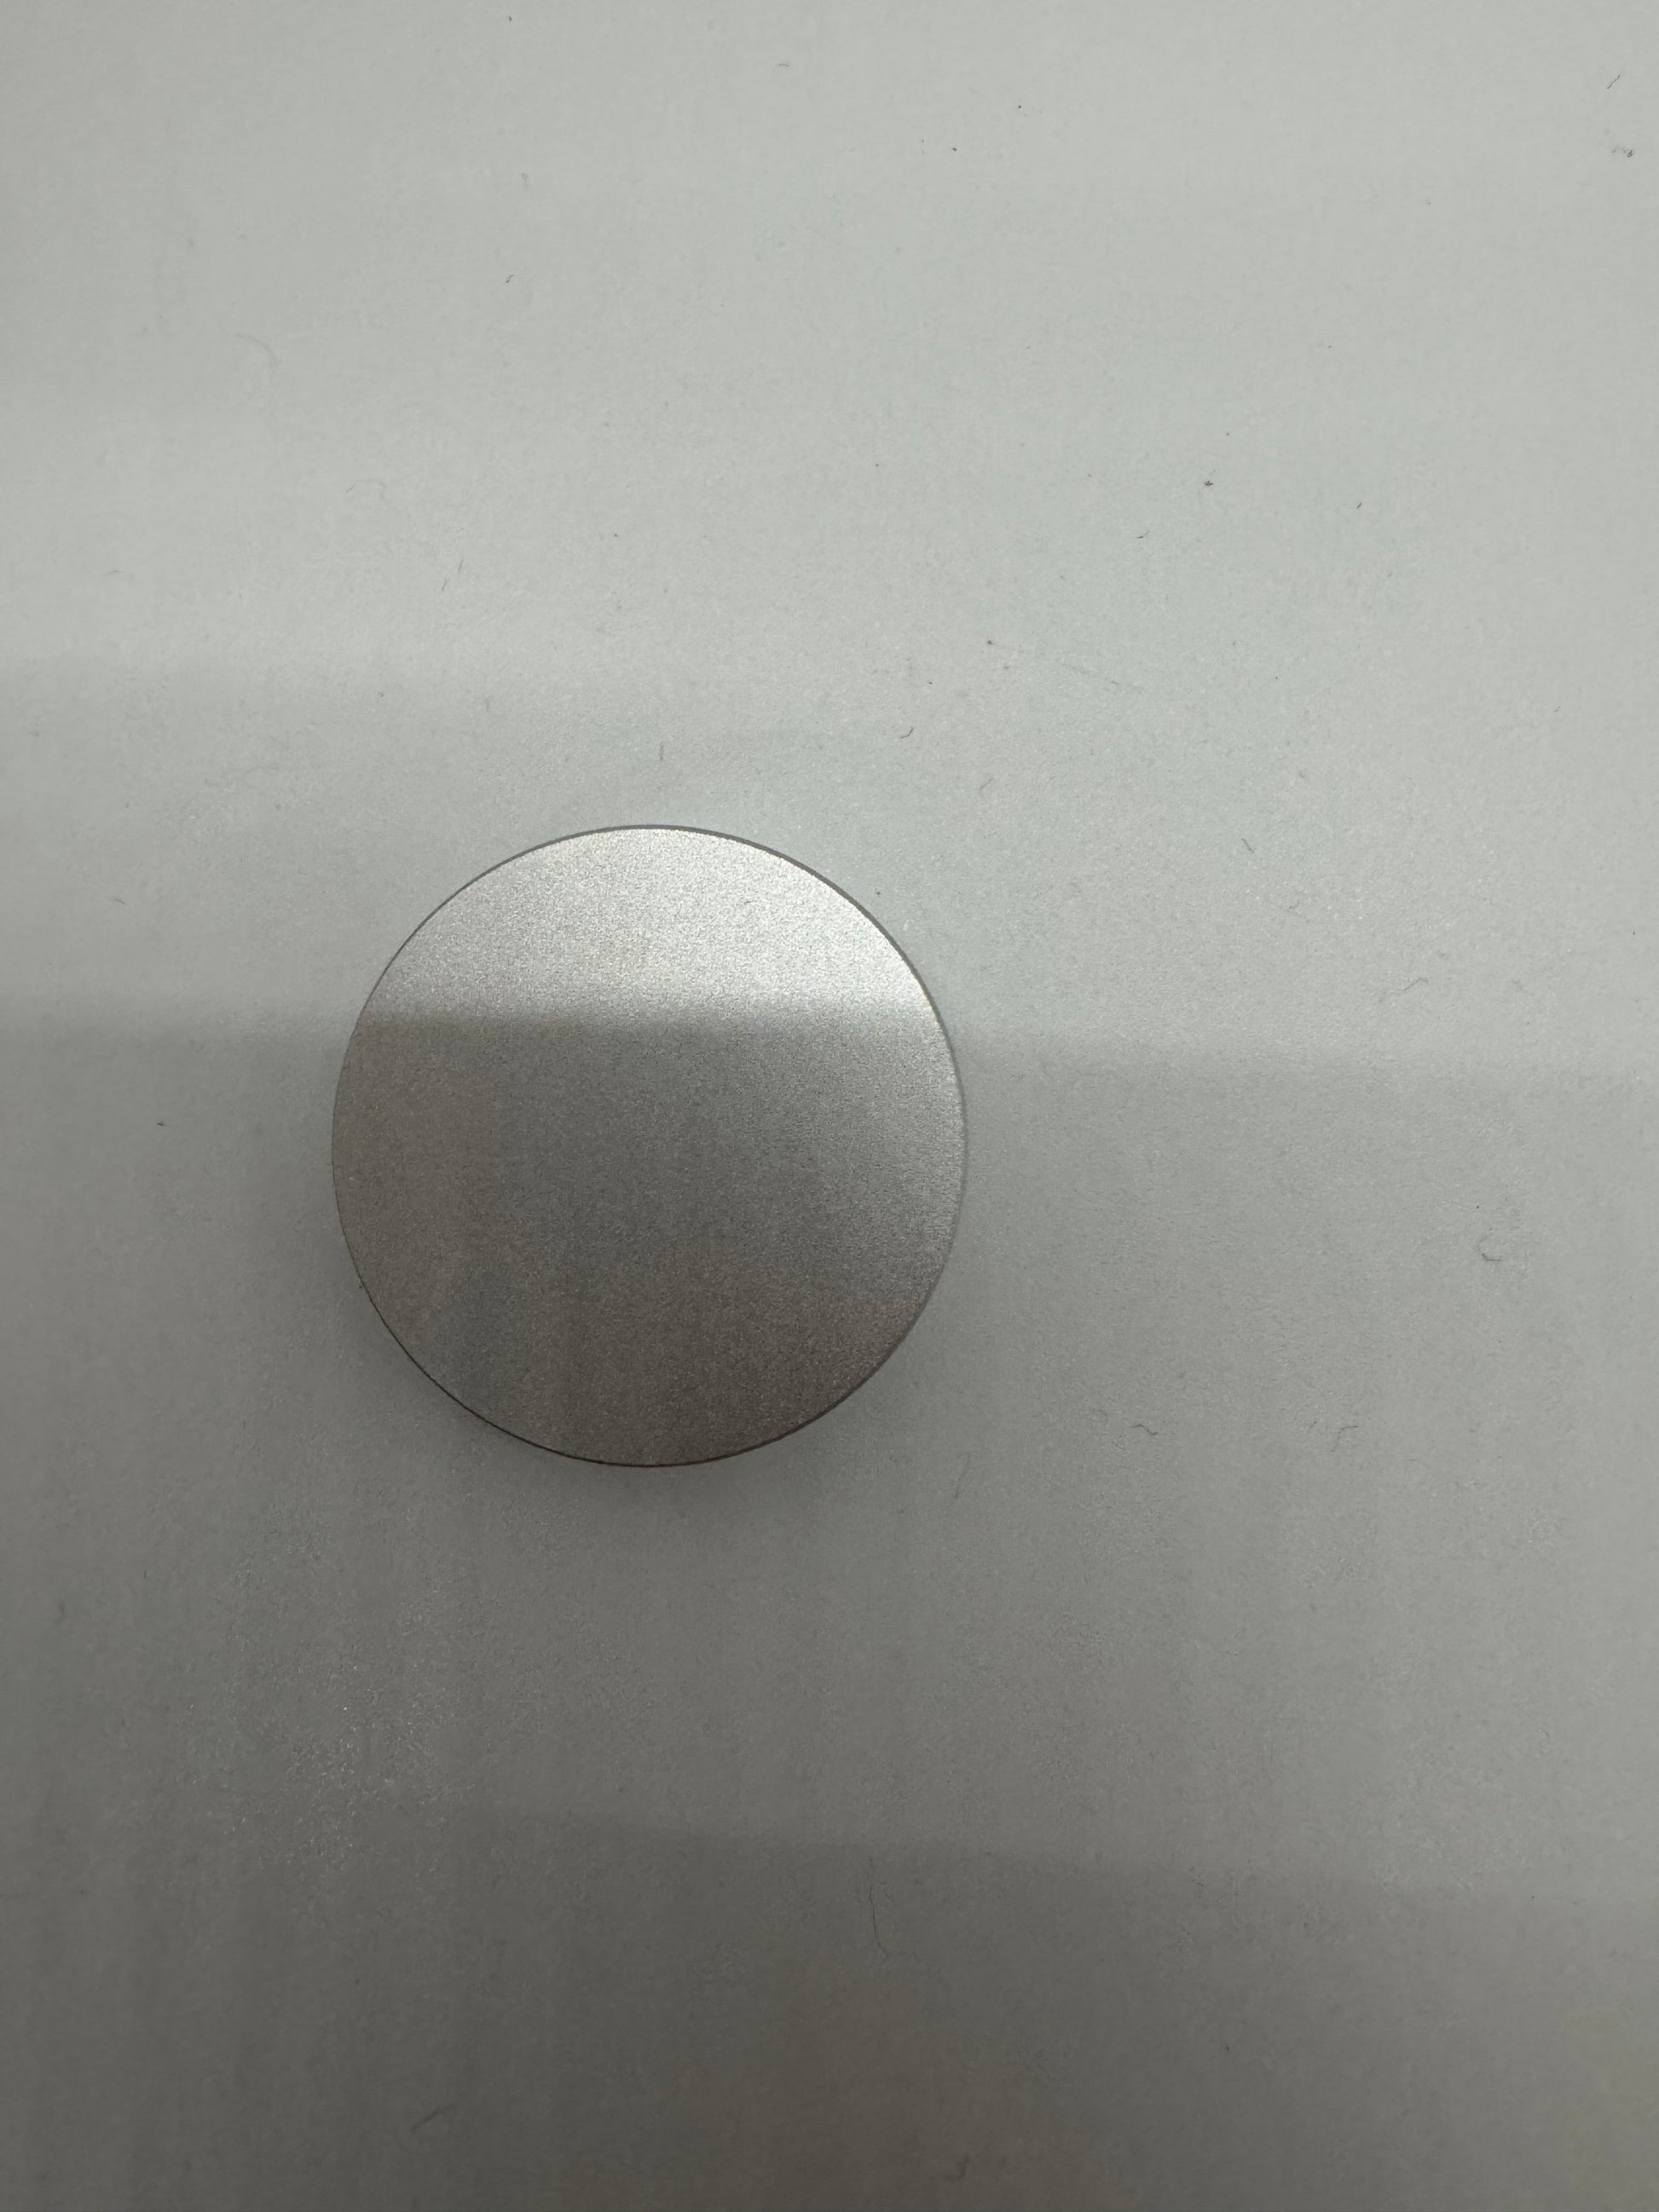 The picture shows a silver, circular object on a light grey background. The object appears to be metallic and flat. It is positioned towards the bottom of the image, and only the top half of the circle is visible. The background has a smooth texture with some minor scratches and specks.